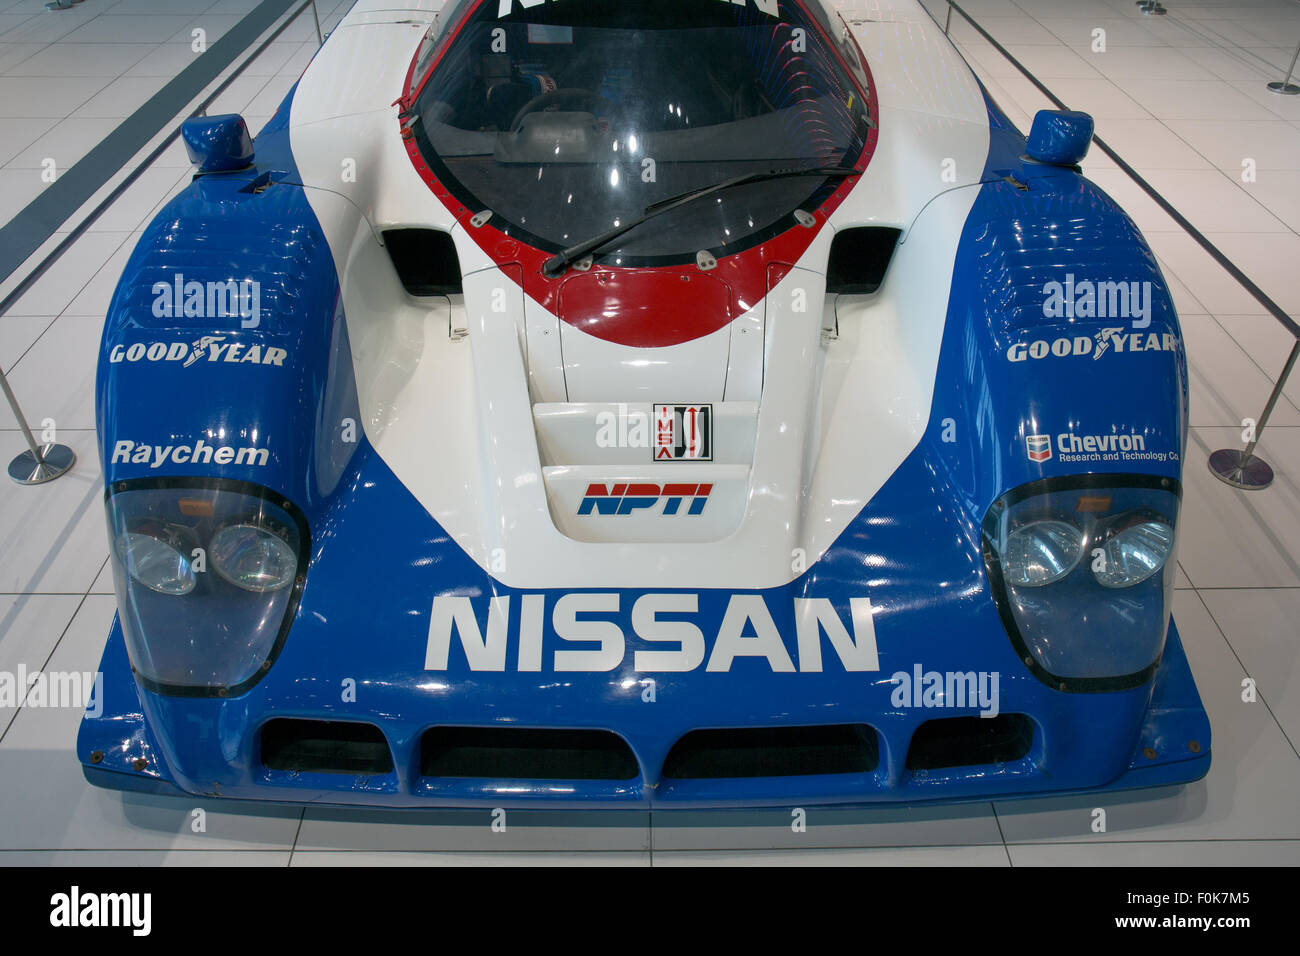 Nissan R90CK front2 2015 Nissan Global Headquarters Gallery Stockfoto